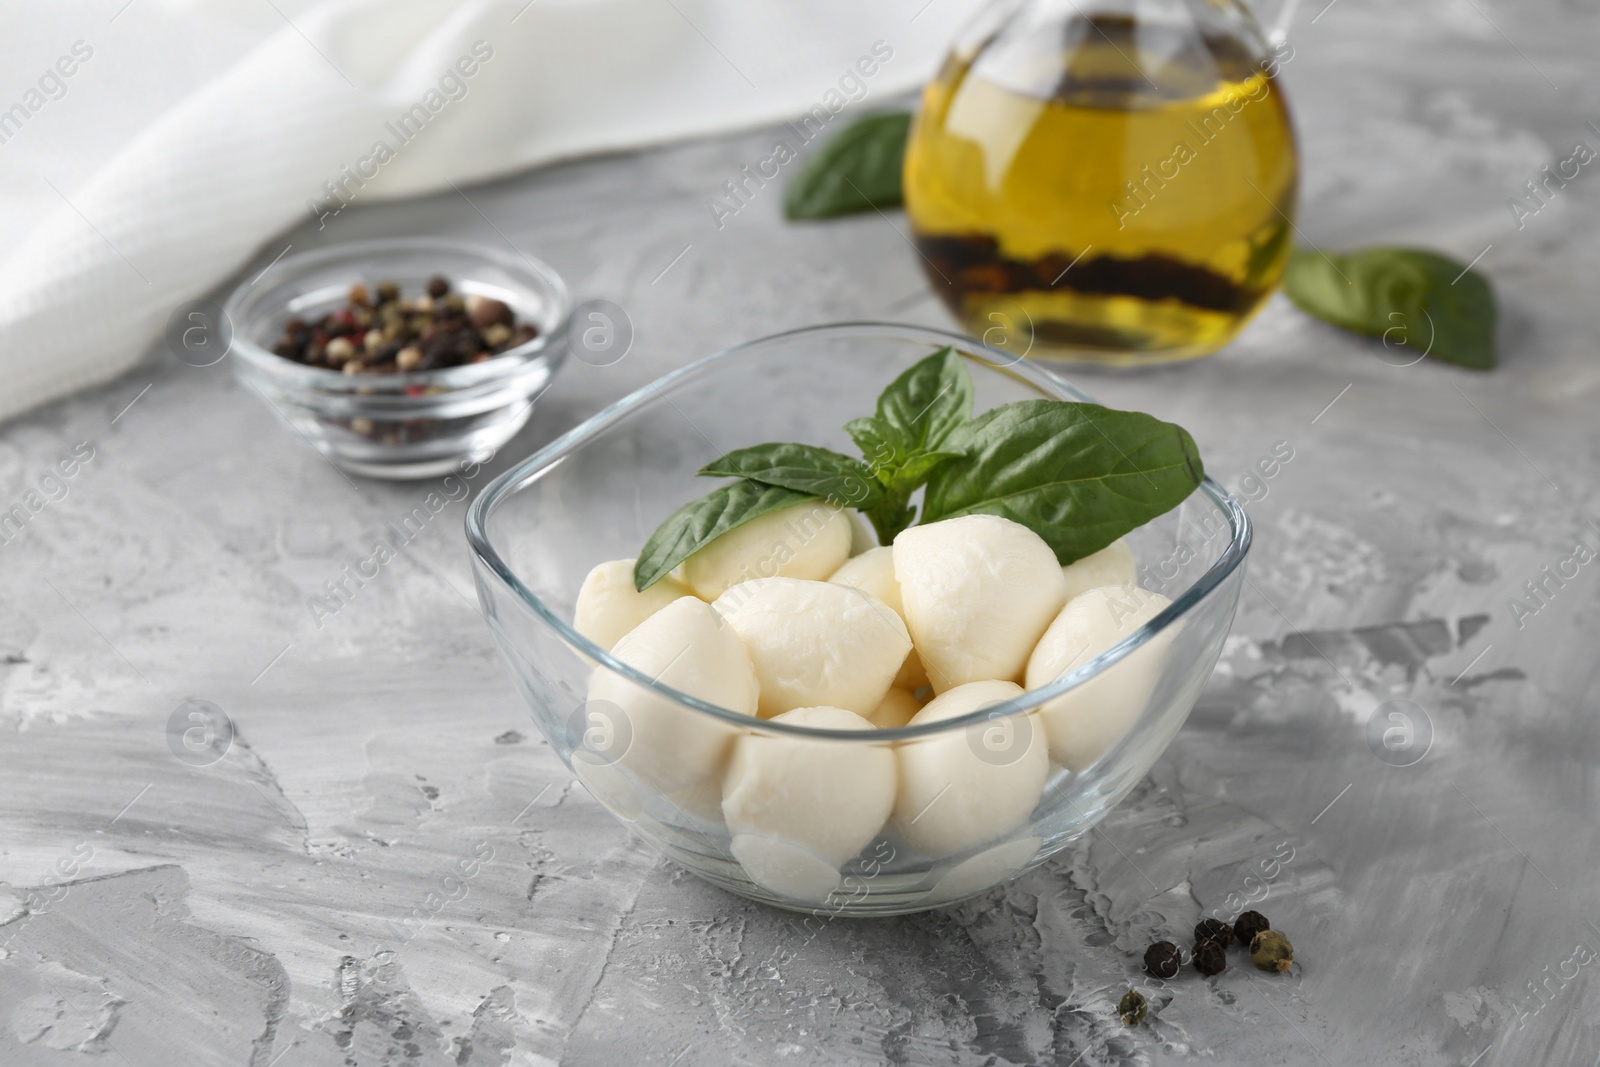 Photo of Tasty mozarella balls, basil leaves and spices on grey textured table